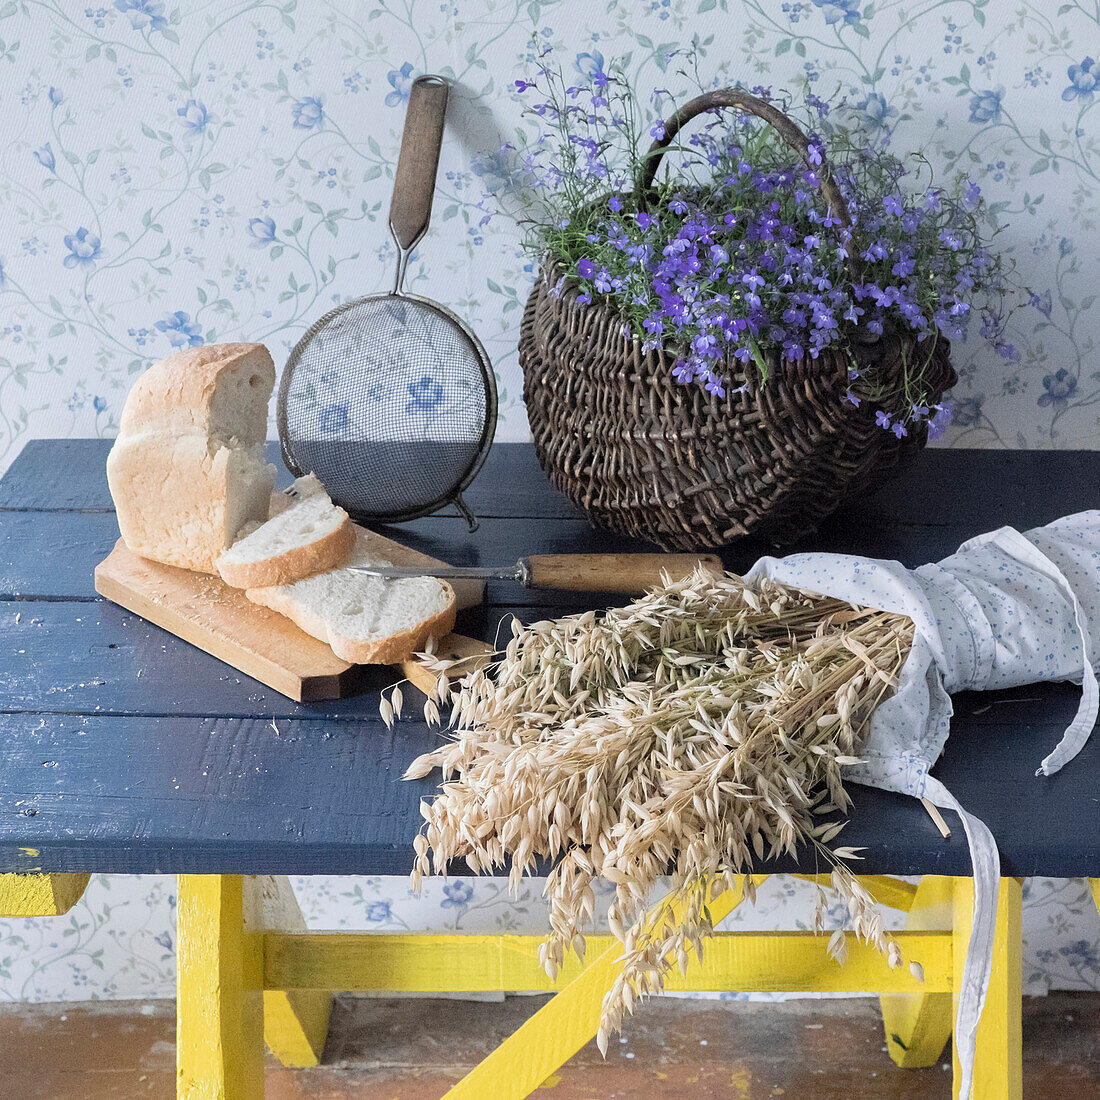 Wheat, sliced bread, sieve and flowers on bench